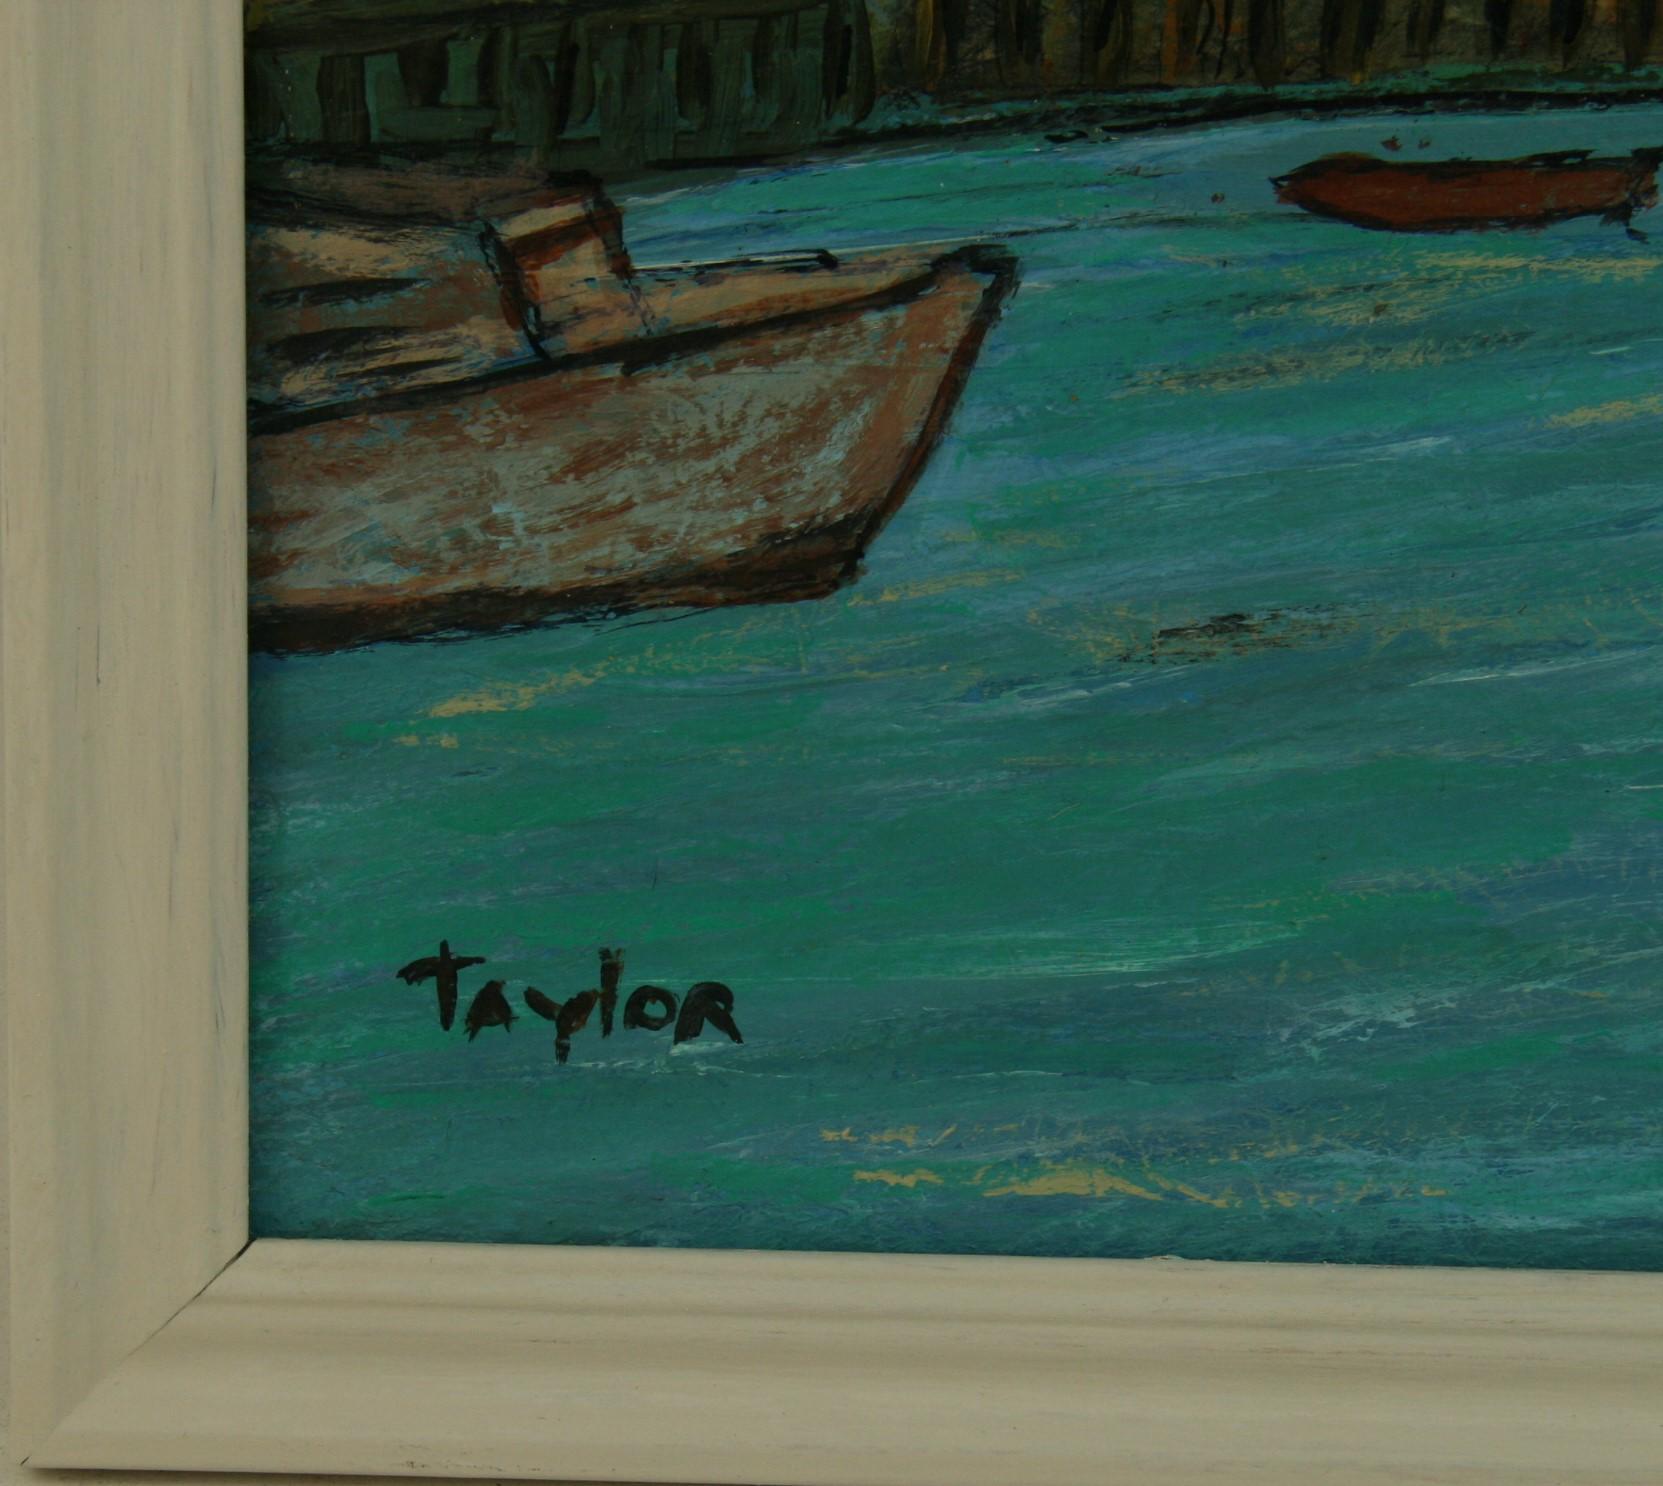 3719 Acrylic on artist board
Set in a hand painted wood frame